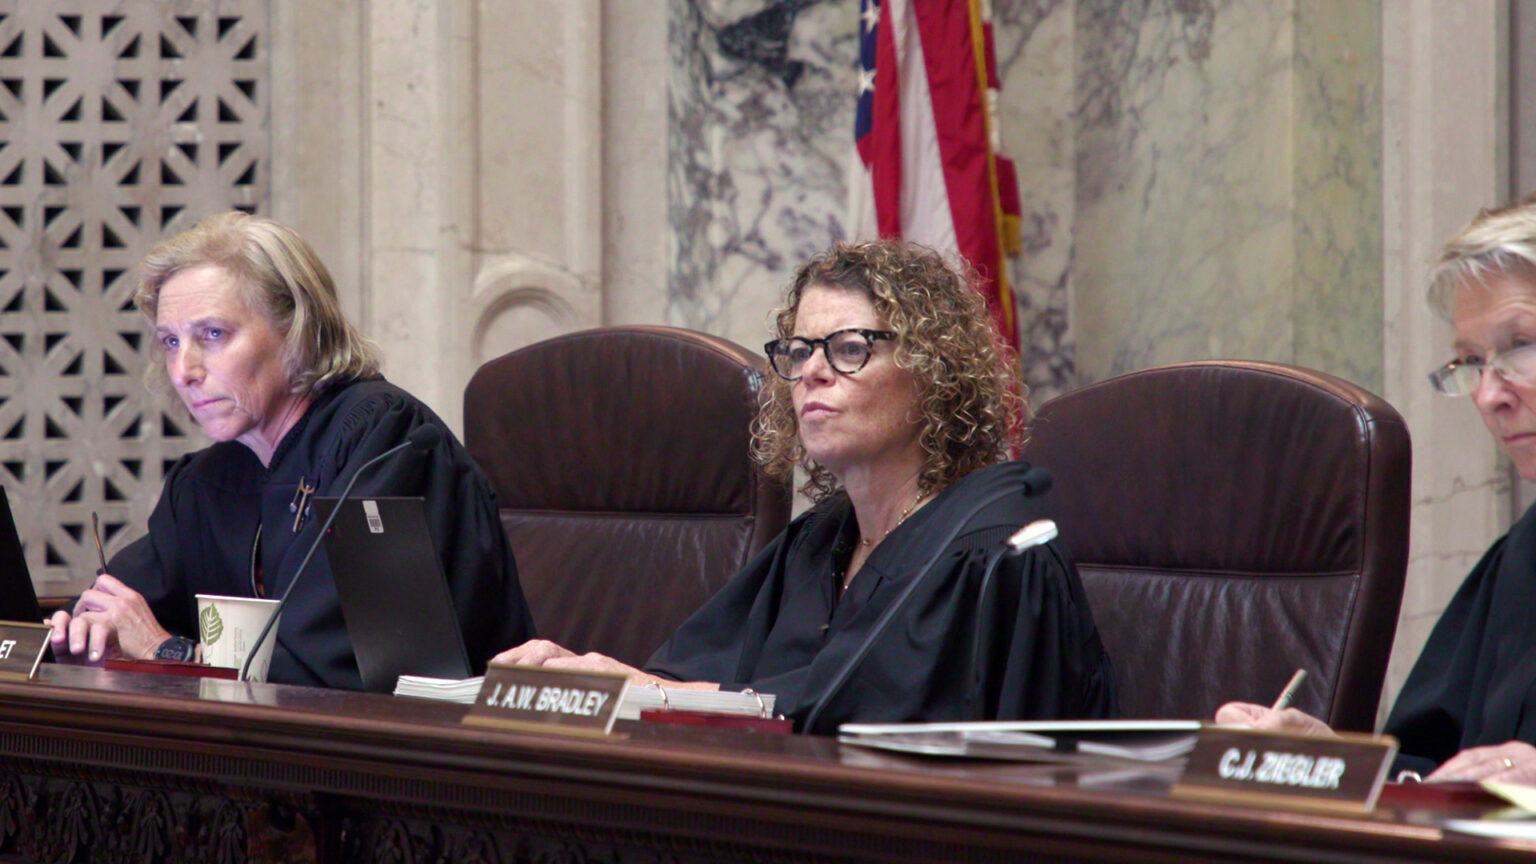 From left to right, Jill Karofsky, Rebecca Dallet, and Ann Walsh Bradley sit at a judicial dais in a row of high-backed leather chairs behind them, in a room with marble masonry and a U.S. flag.